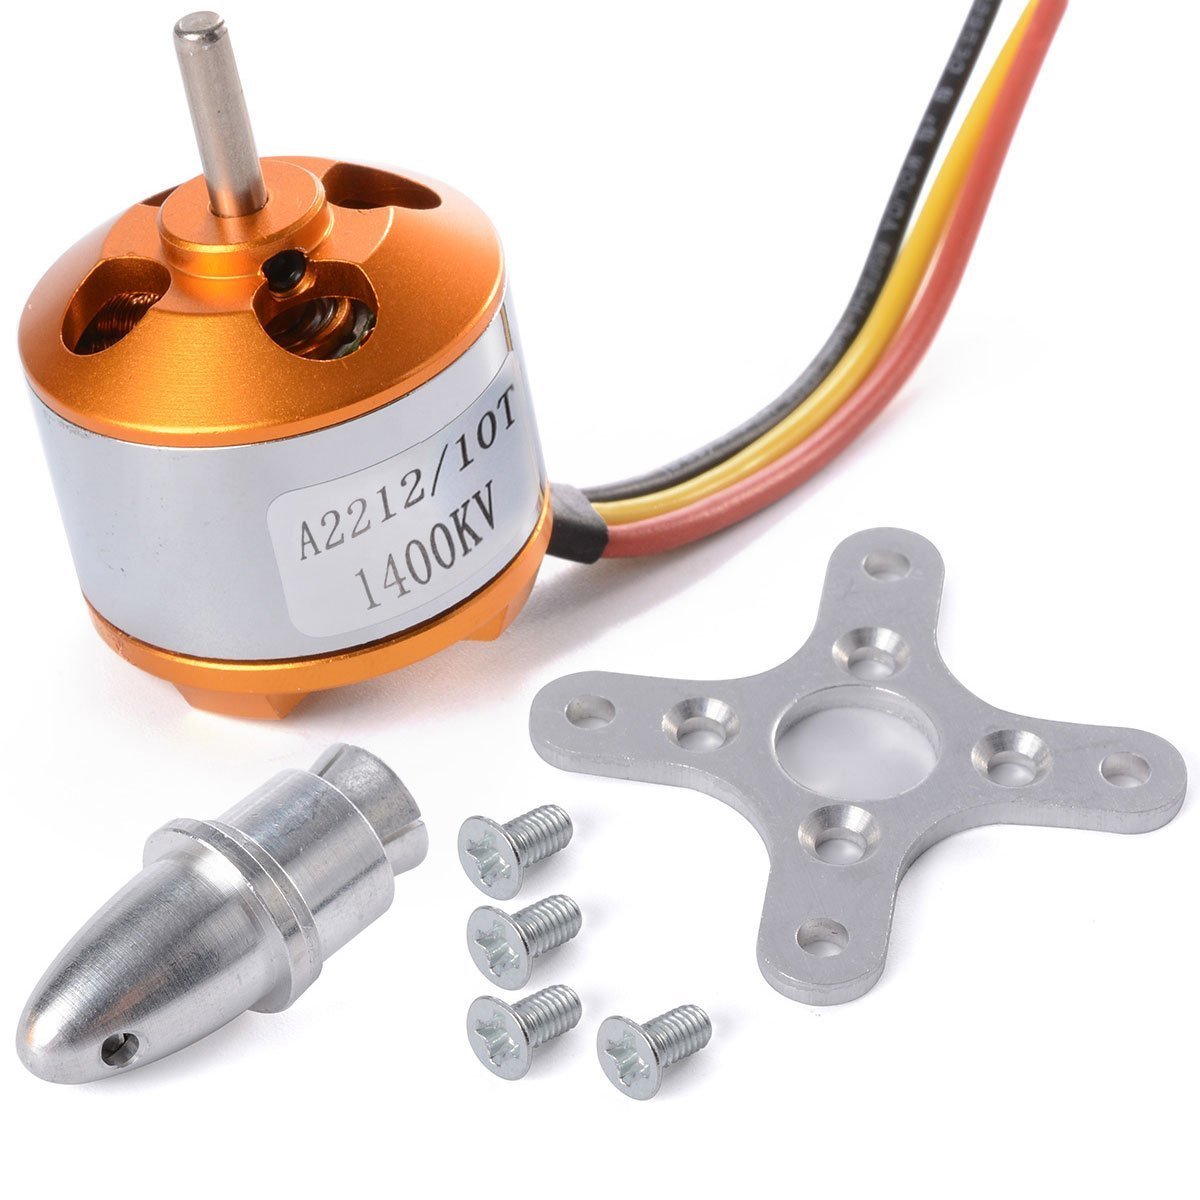 1400KV A2212/10T Brushless Motor With Bullet Connector for Drone & RC Plane